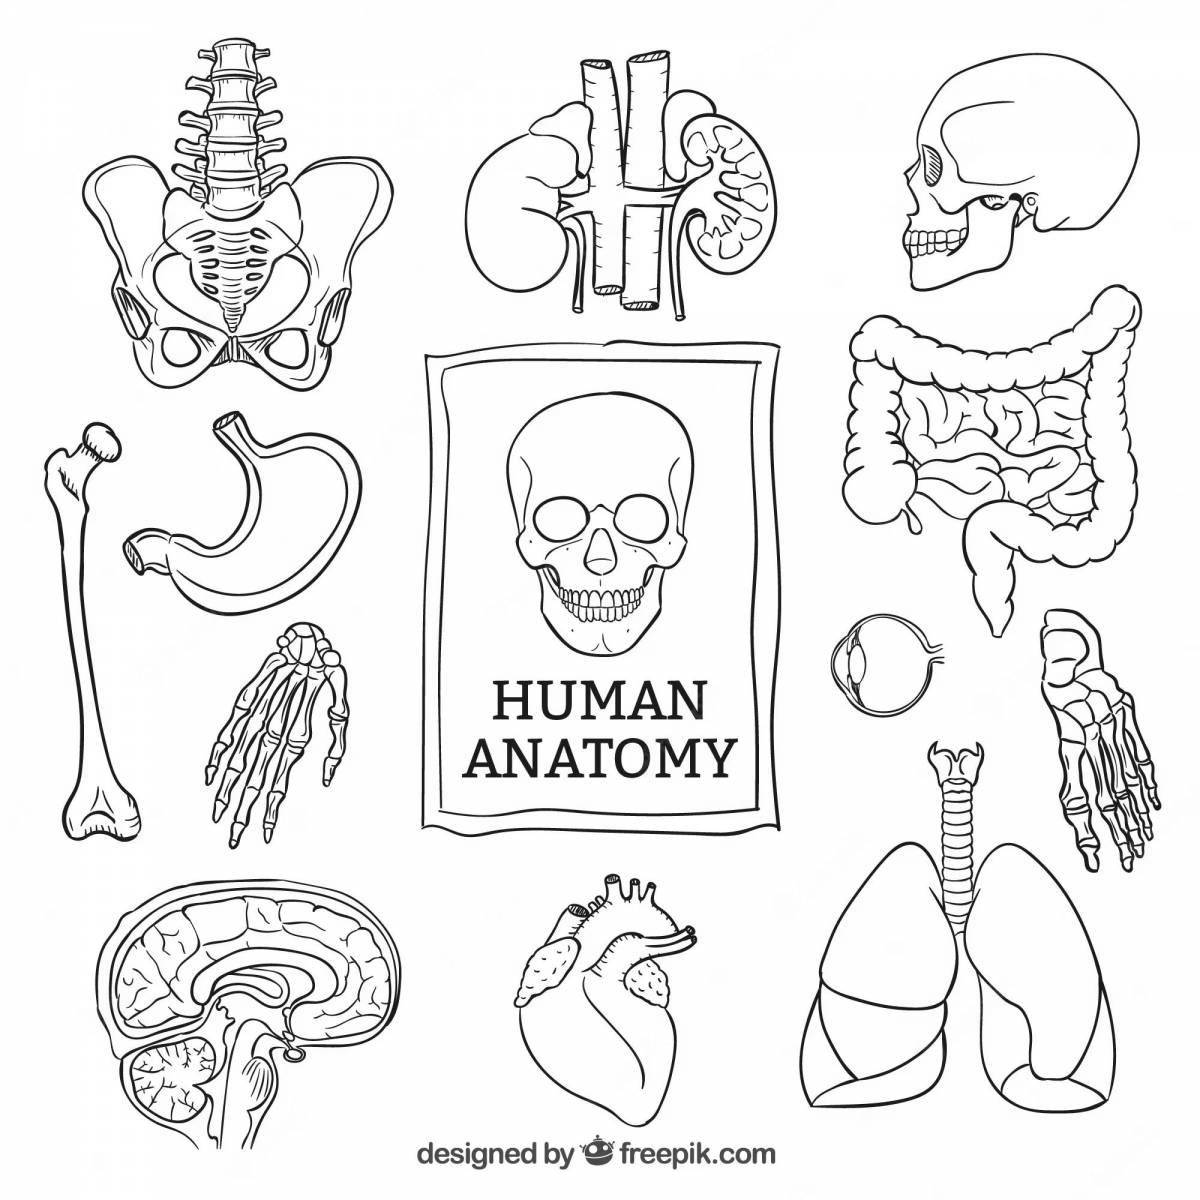 Stimulating human anatomy coloring page for kids